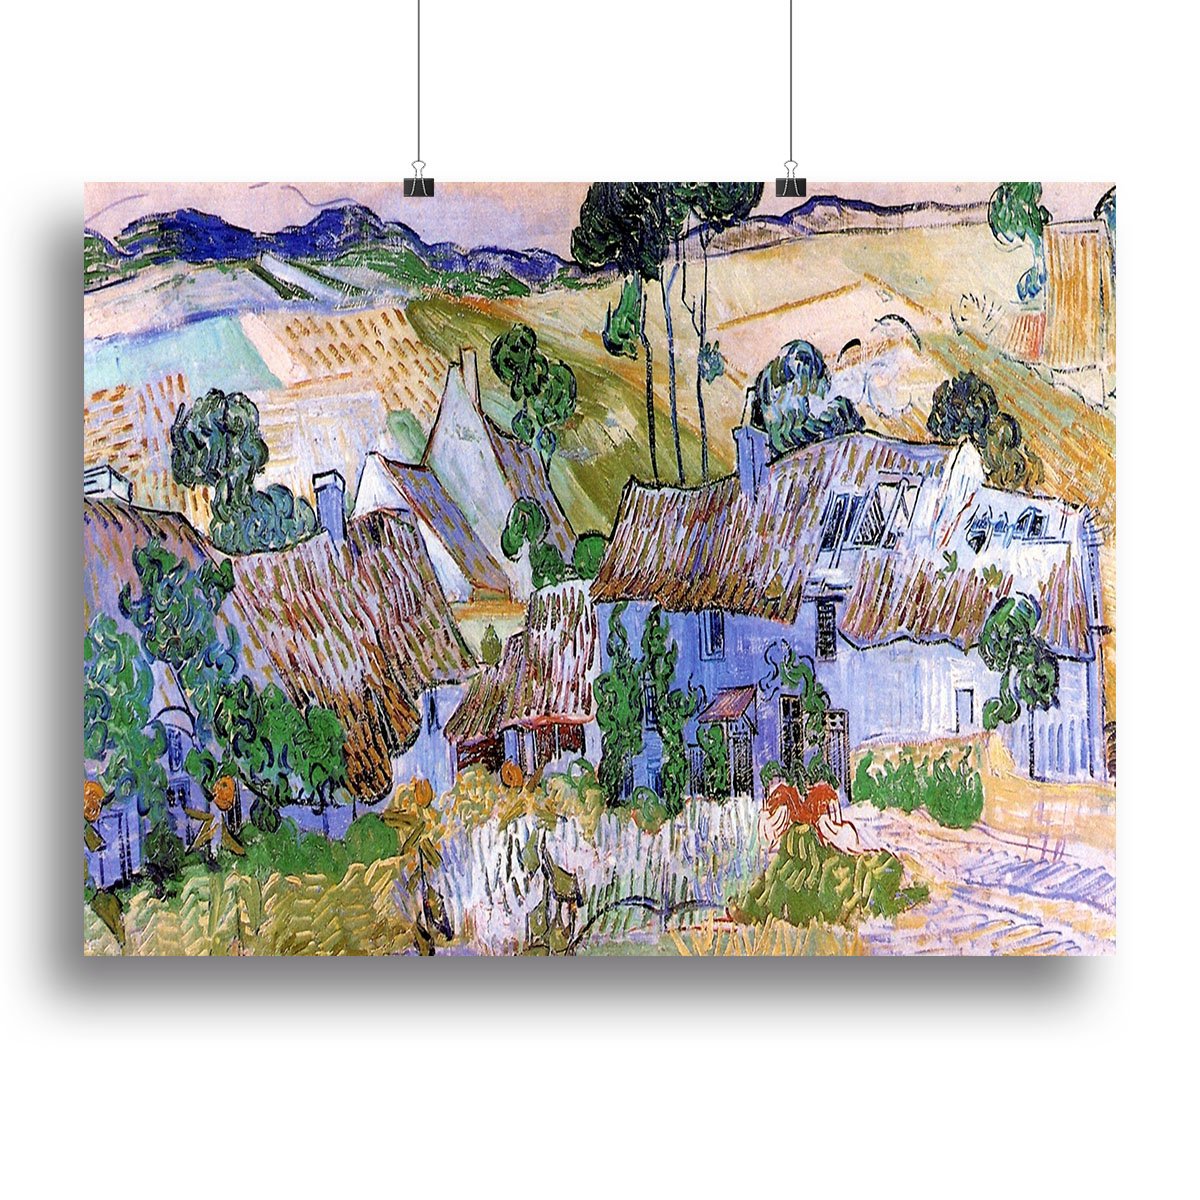 Thatched Cottages by a Hill by Van Gogh Canvas Print or Poster